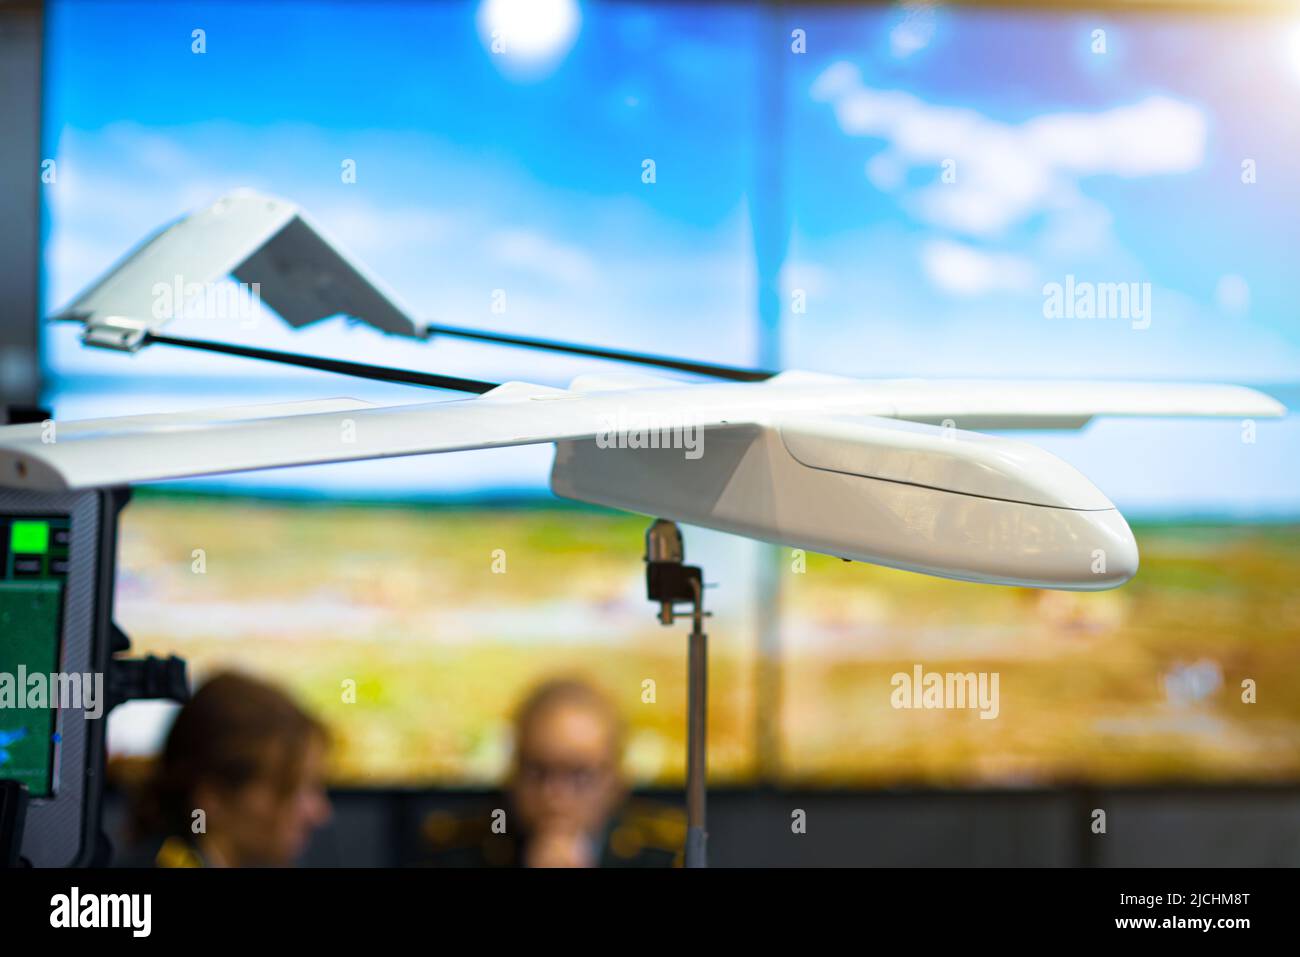 Unmanned aerial vehicle. Military and defense industry. Aerospace technologies. Stock Photo